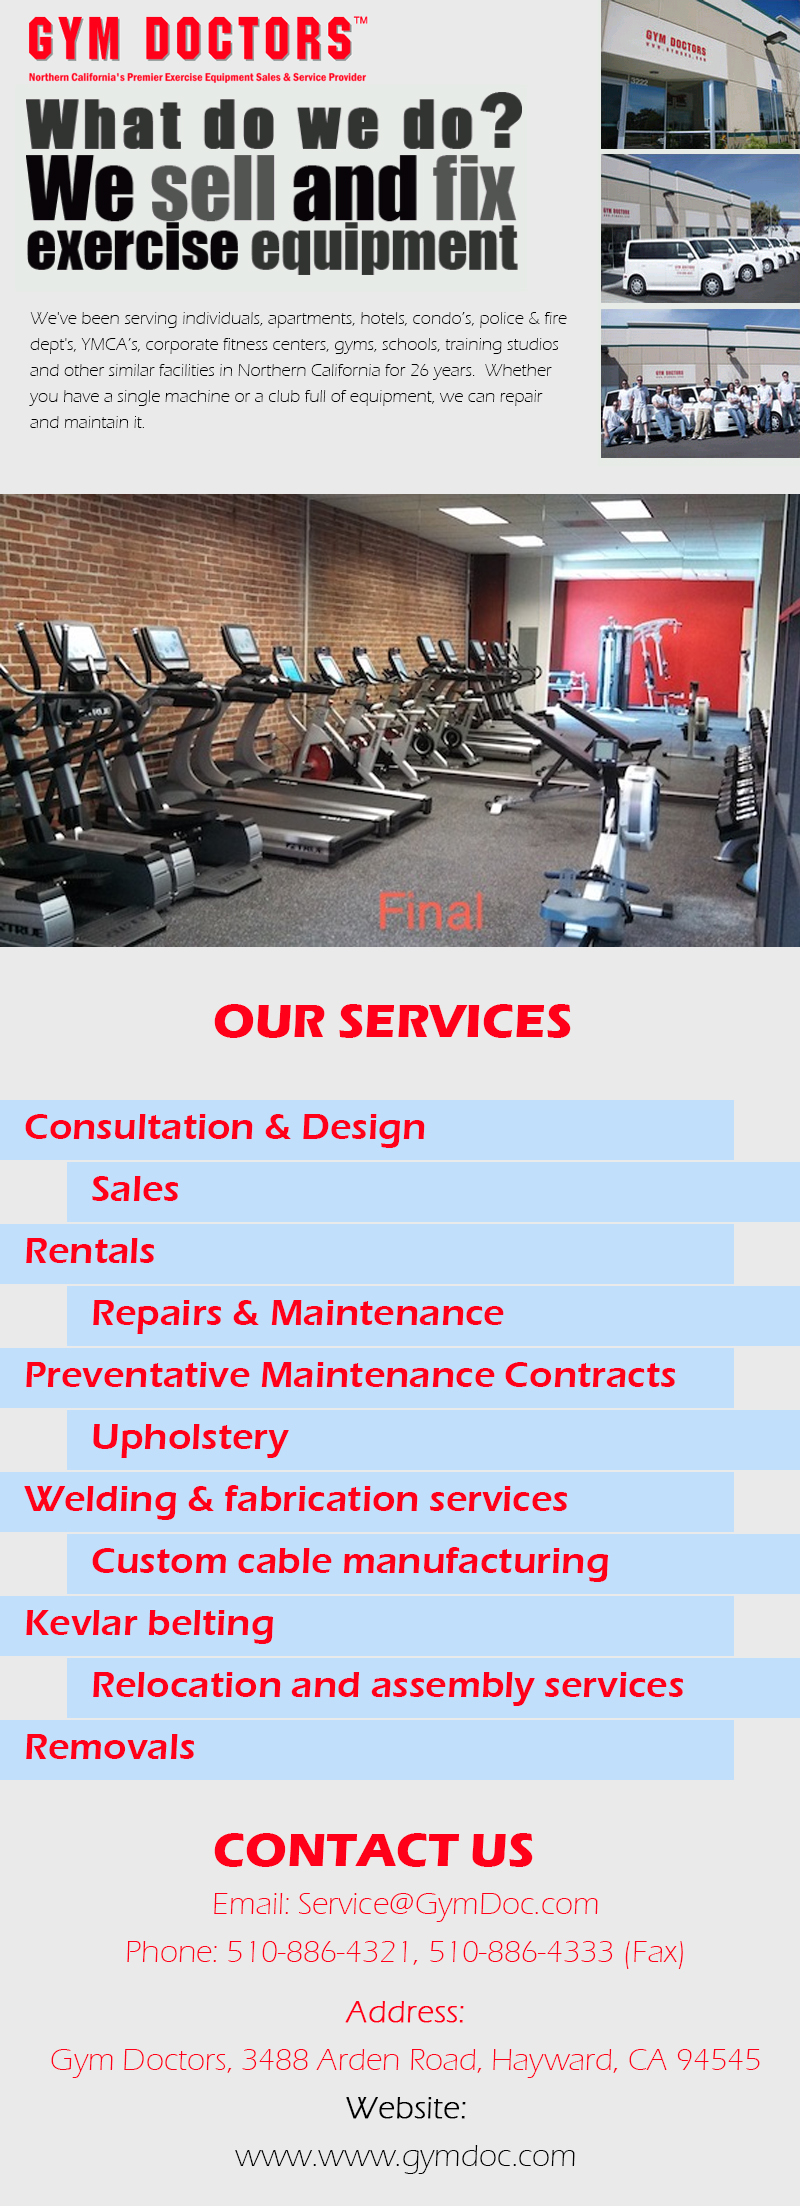 Gym Doctors Northern California's Premier exercise equipment sales and service provider. we repair any and all exercise and fitness equipment and specialize in cardio equipment repair service. For more info at https://www.gymdoc.com/
 by gymdoctors